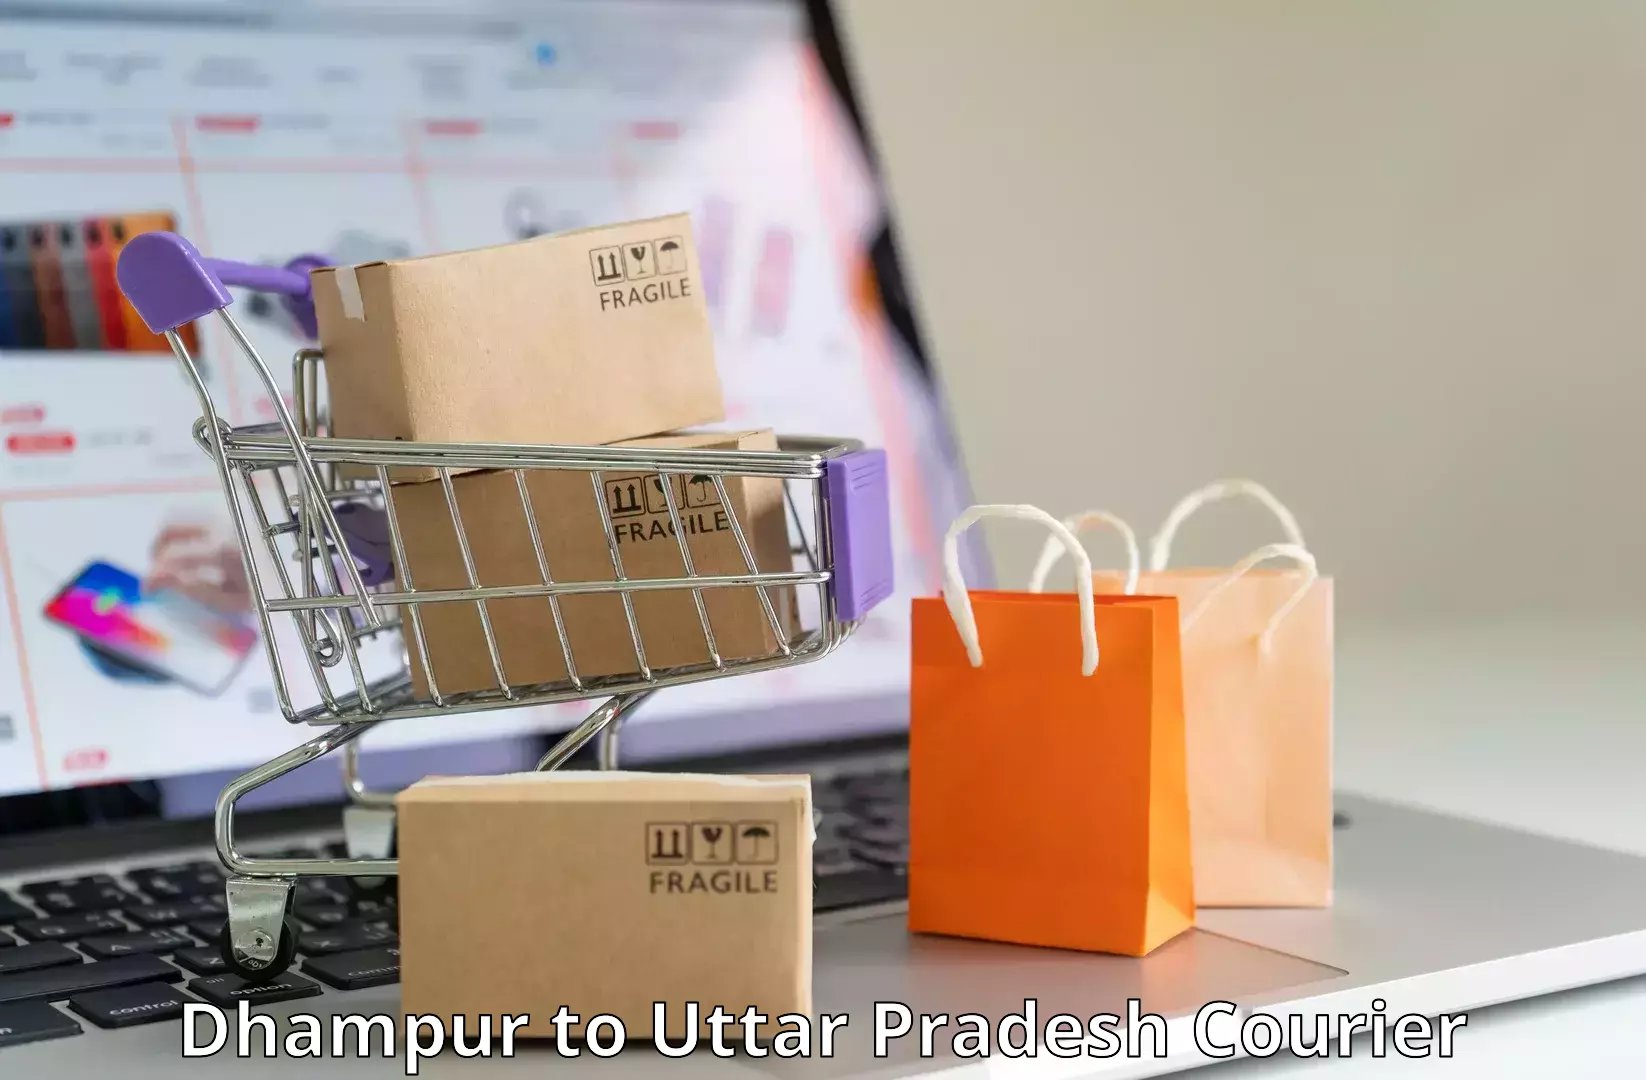 On-call courier service Dhampur to Etah